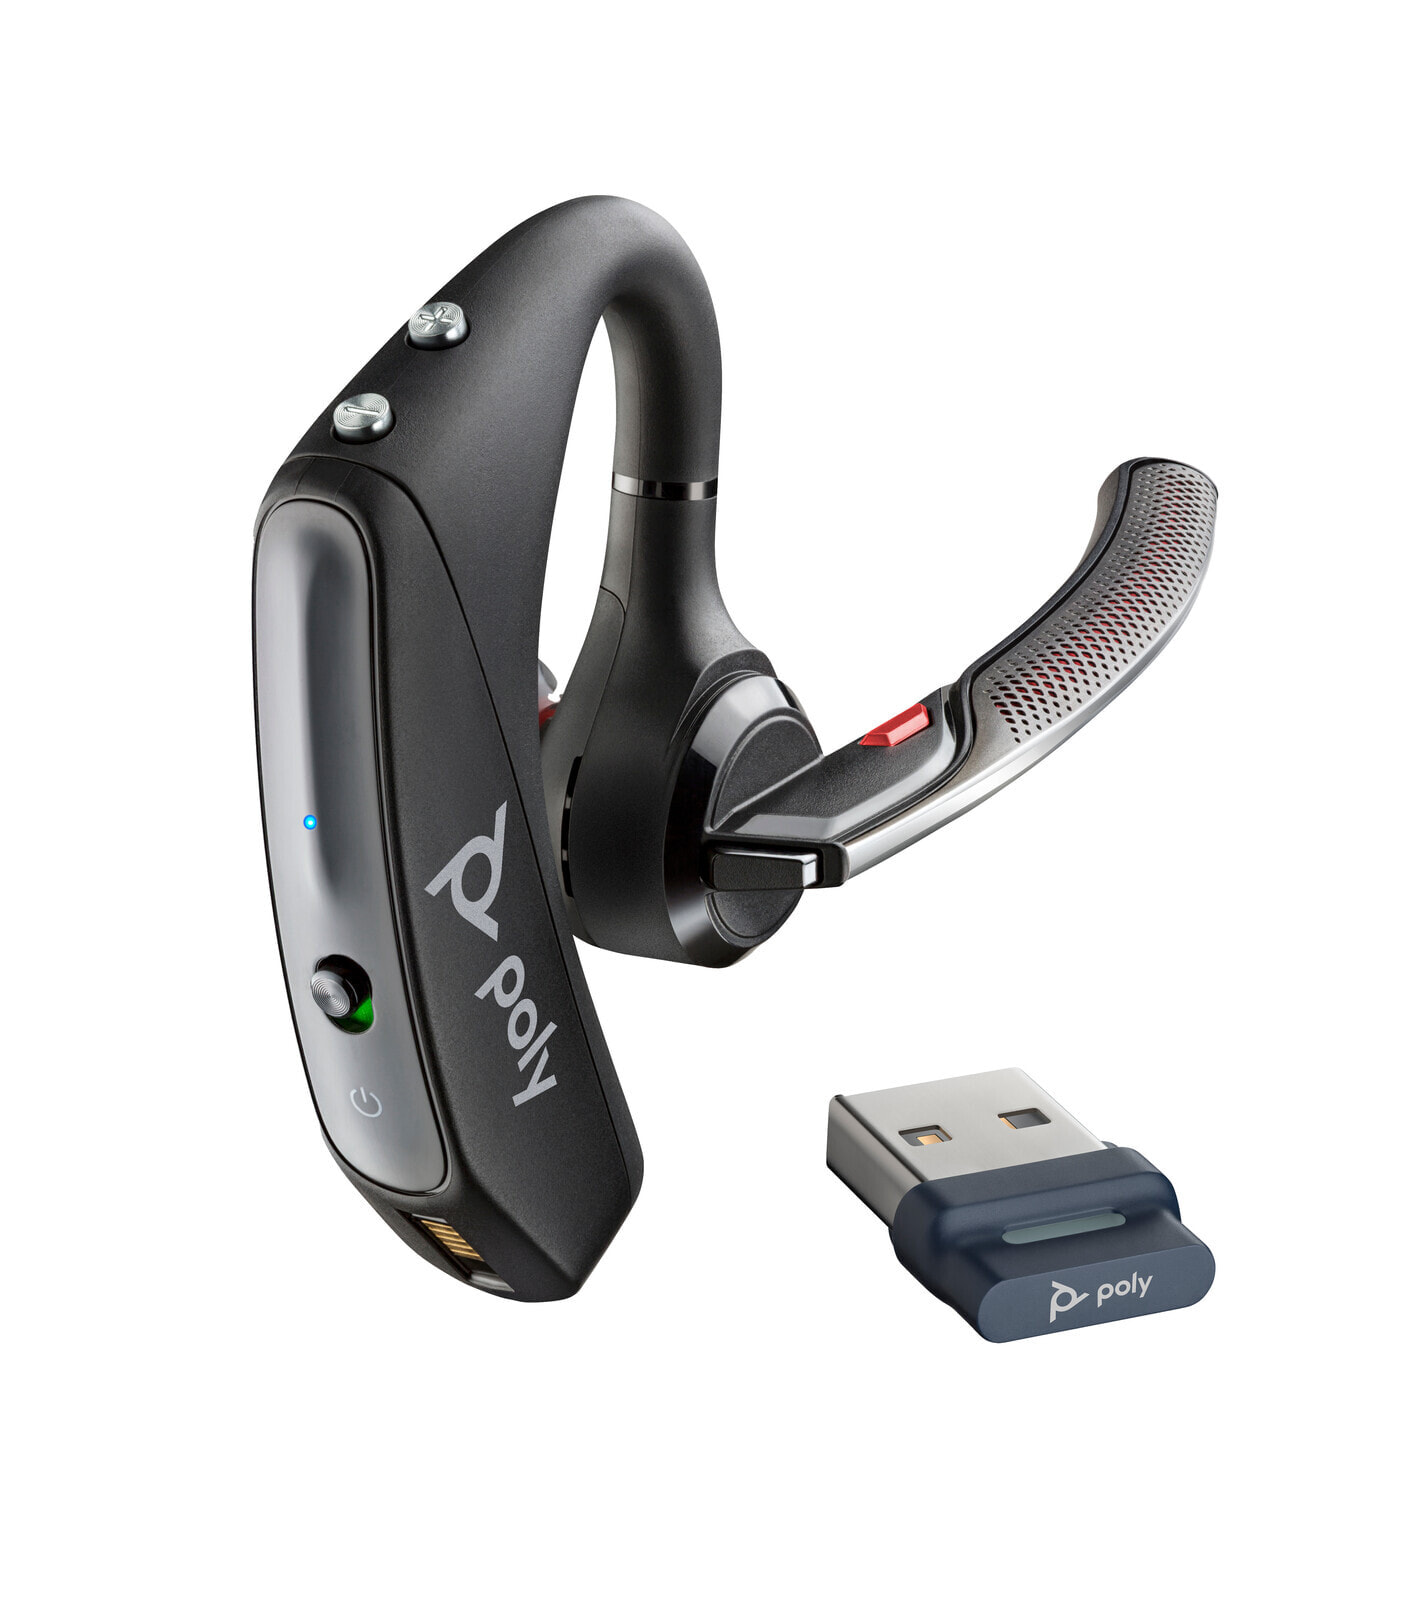 Voyager 5200 - Wireless - Car/Home office - Headset - Black